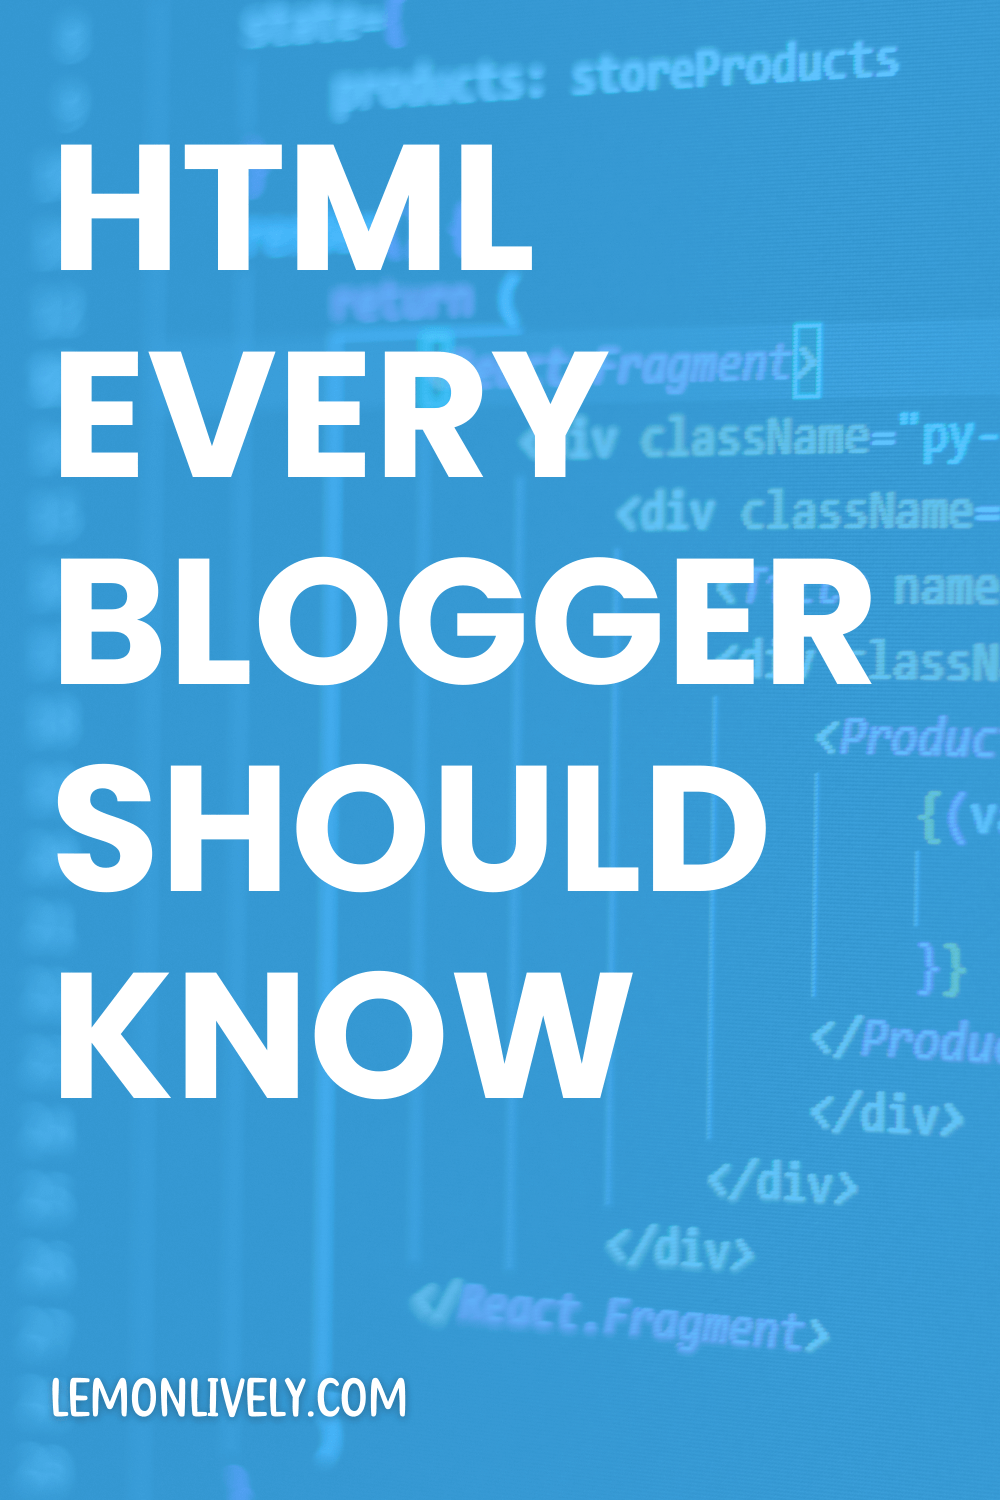 "HTML every blogger should know" in white, atop a light blue overlay, atop an image of code in a code editor